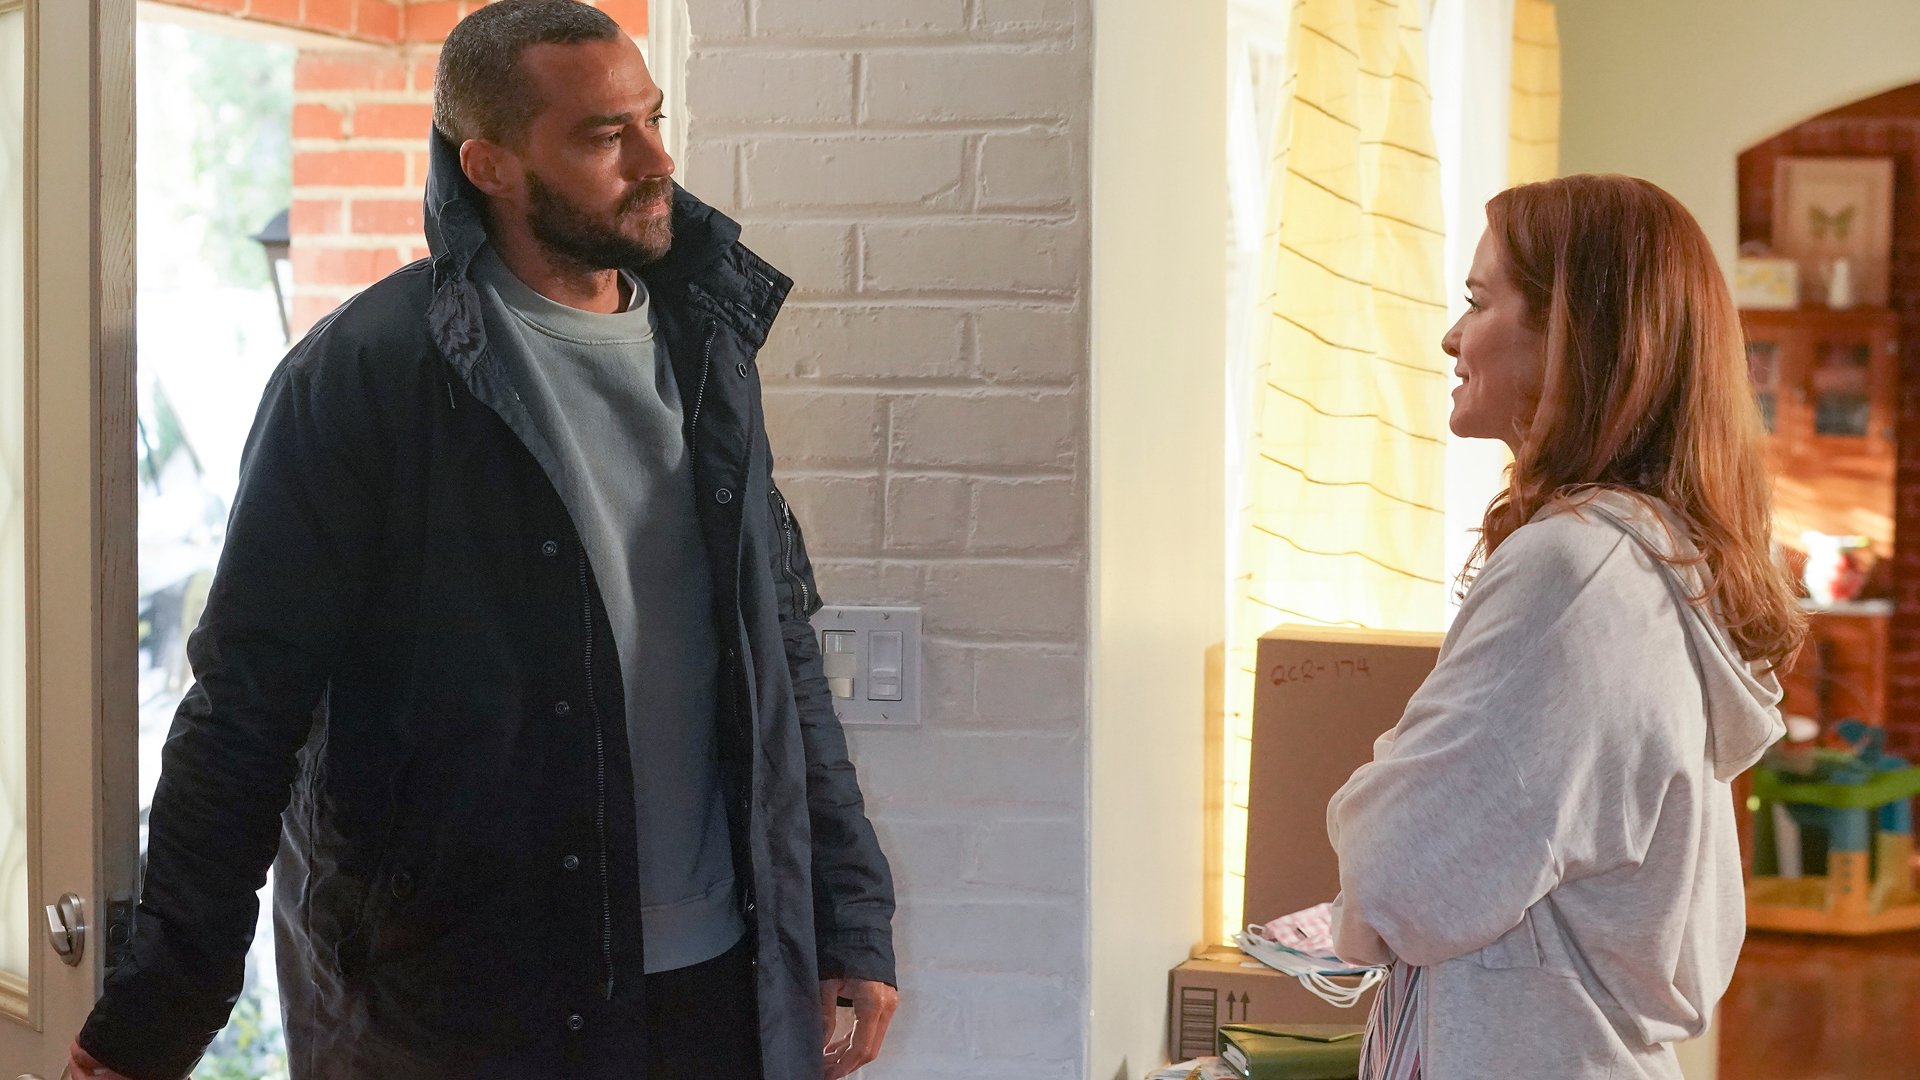 Jesse Williams as Jackson Avery and Sarah Drew as April Kepner together again in ‘Grey’s Anatomy’ Season 17 Episode 14